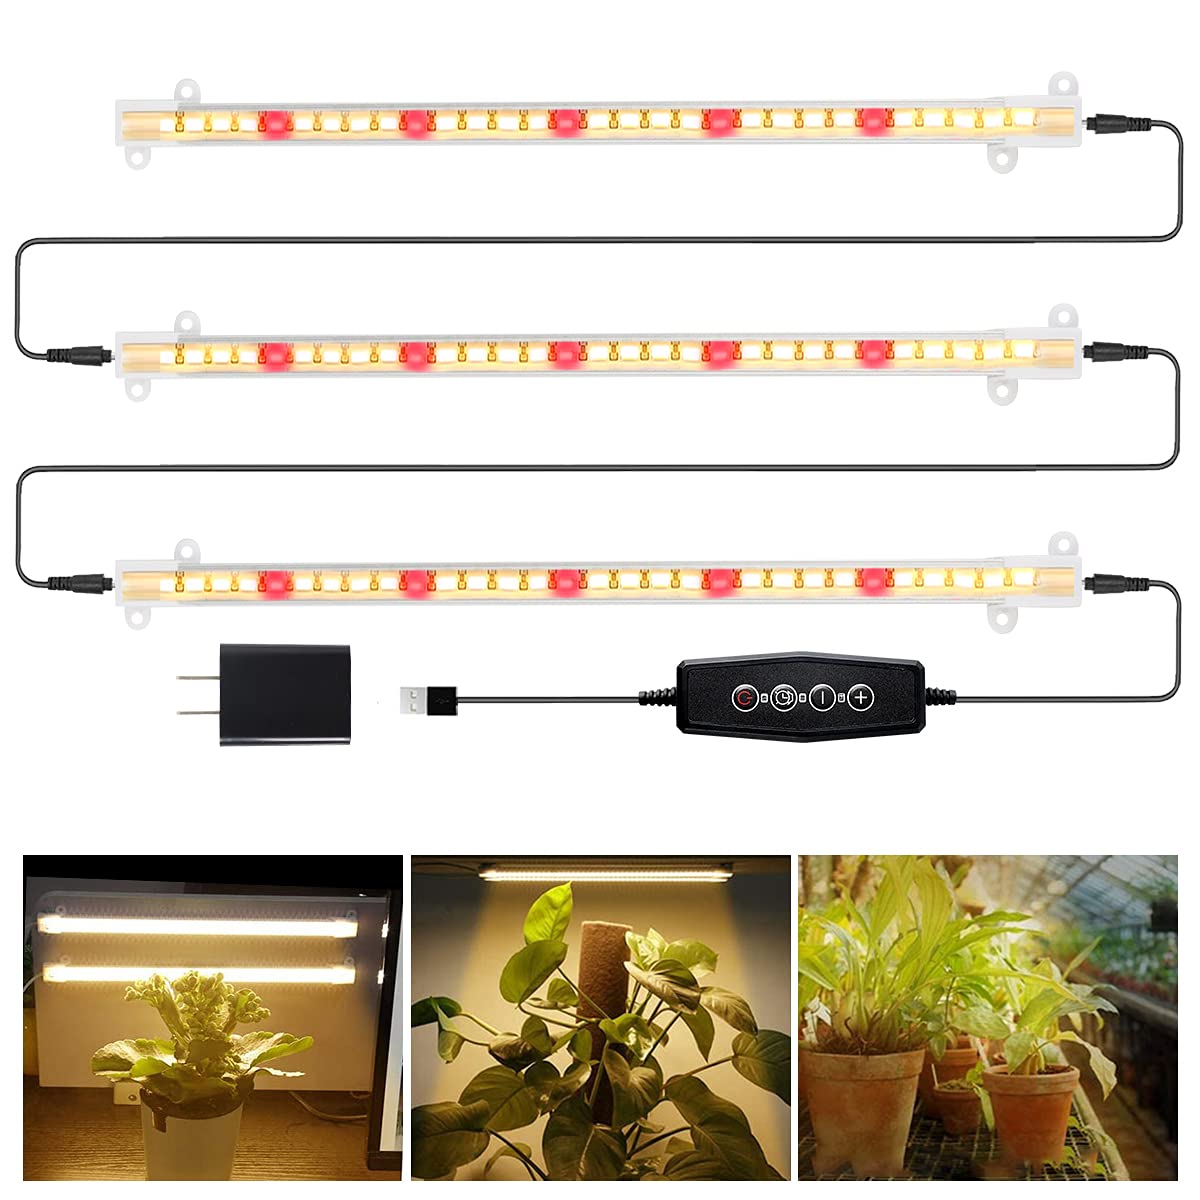 GYTF LED Grow Light Strips, 3500K 90-Bulb Full Spectrum Dimmable Plant Growing Lamp Bars with Auto ON/Off Timer for Indoor Plant